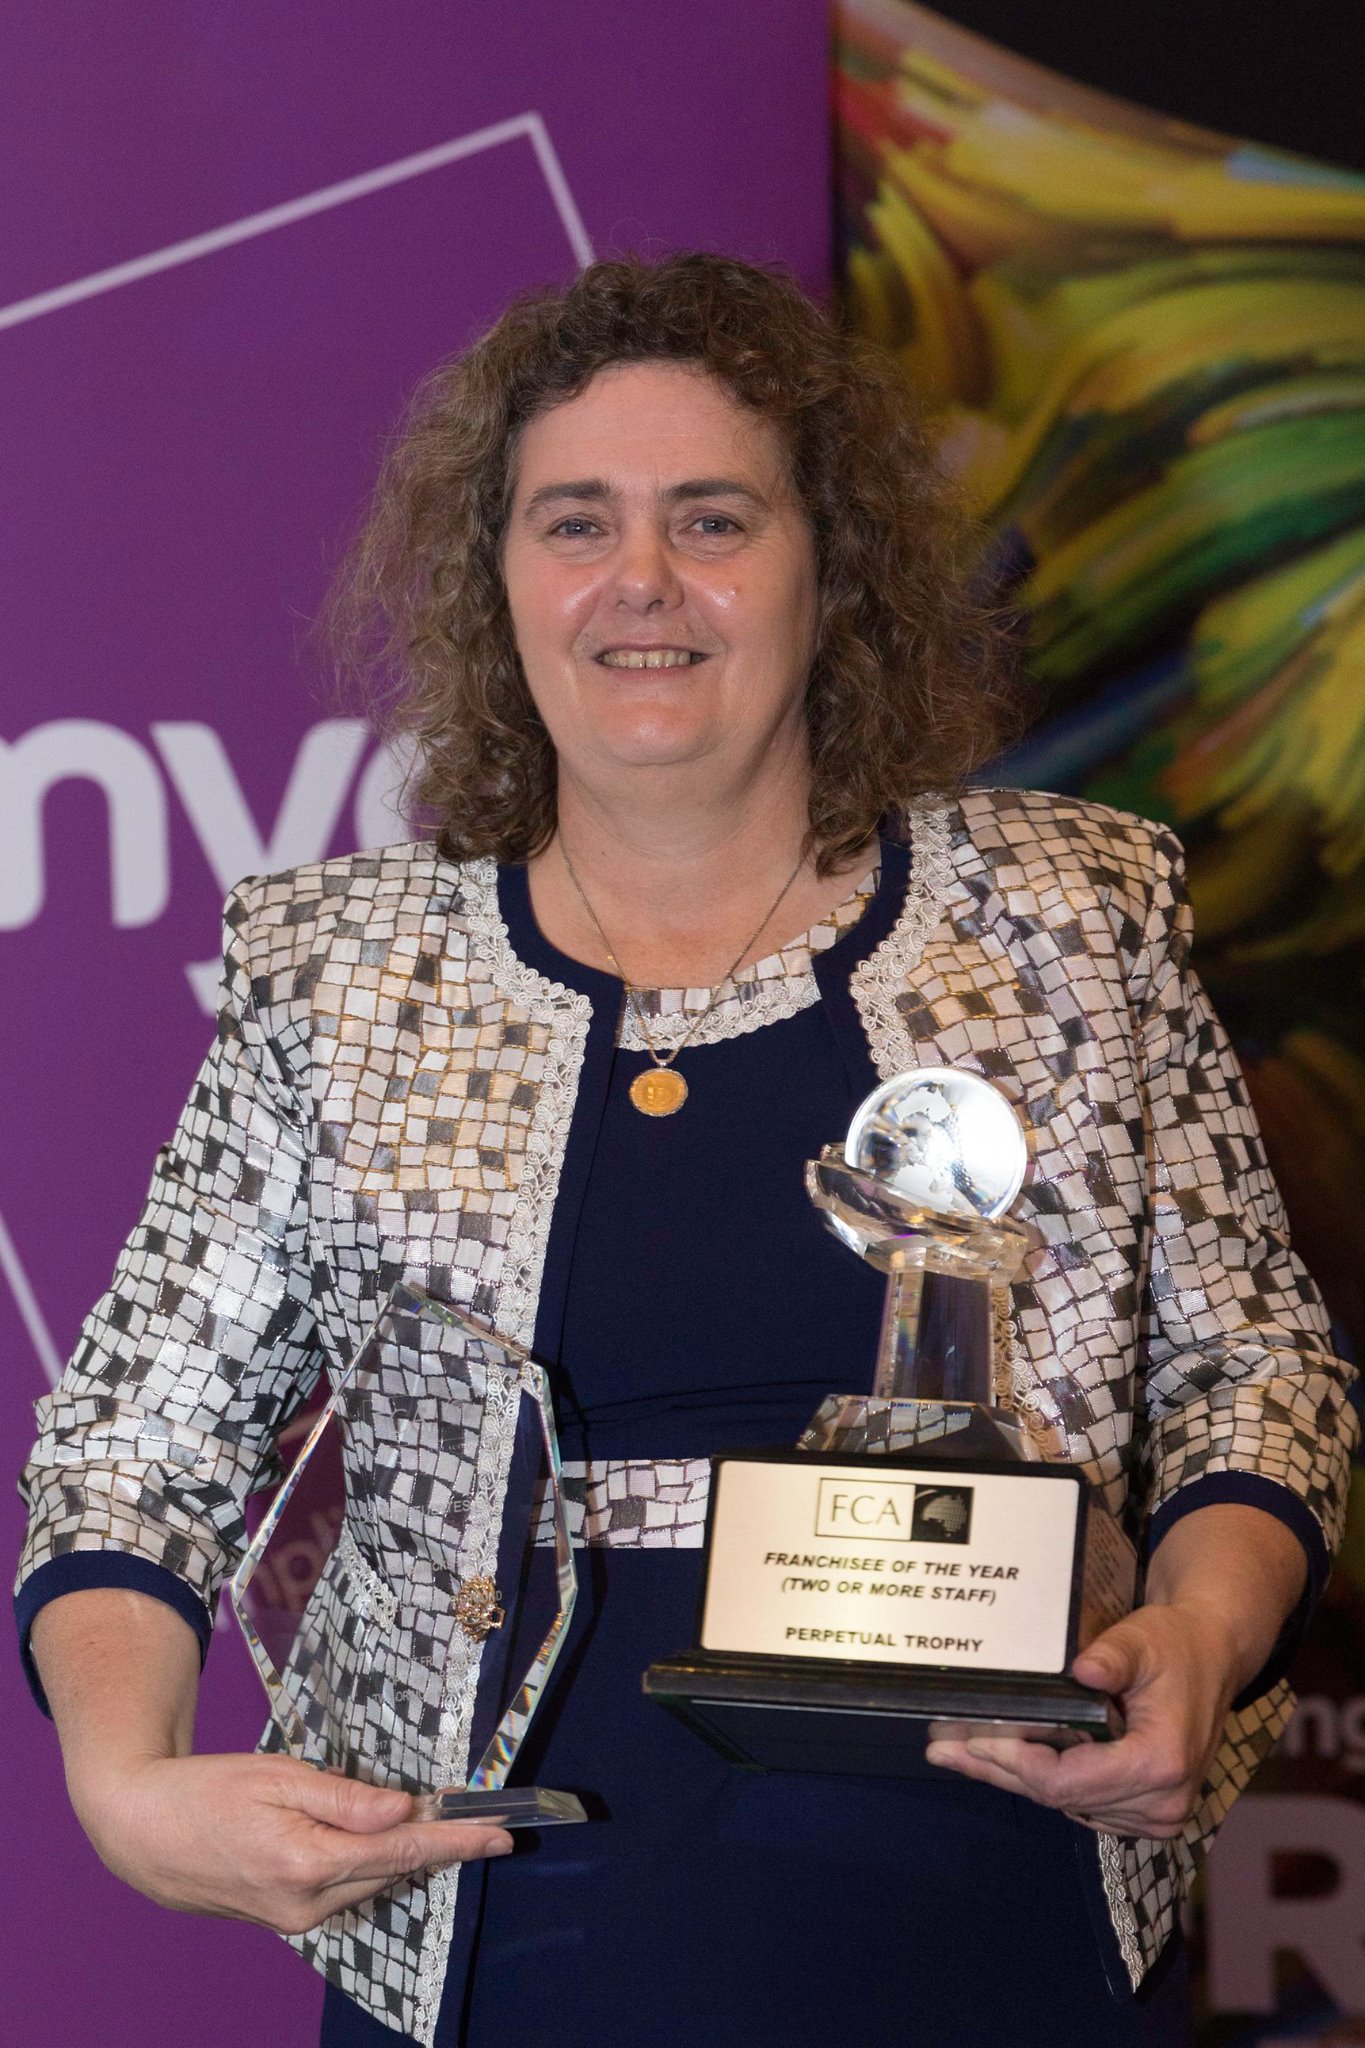 a women holding pointing to her award posing for a photo